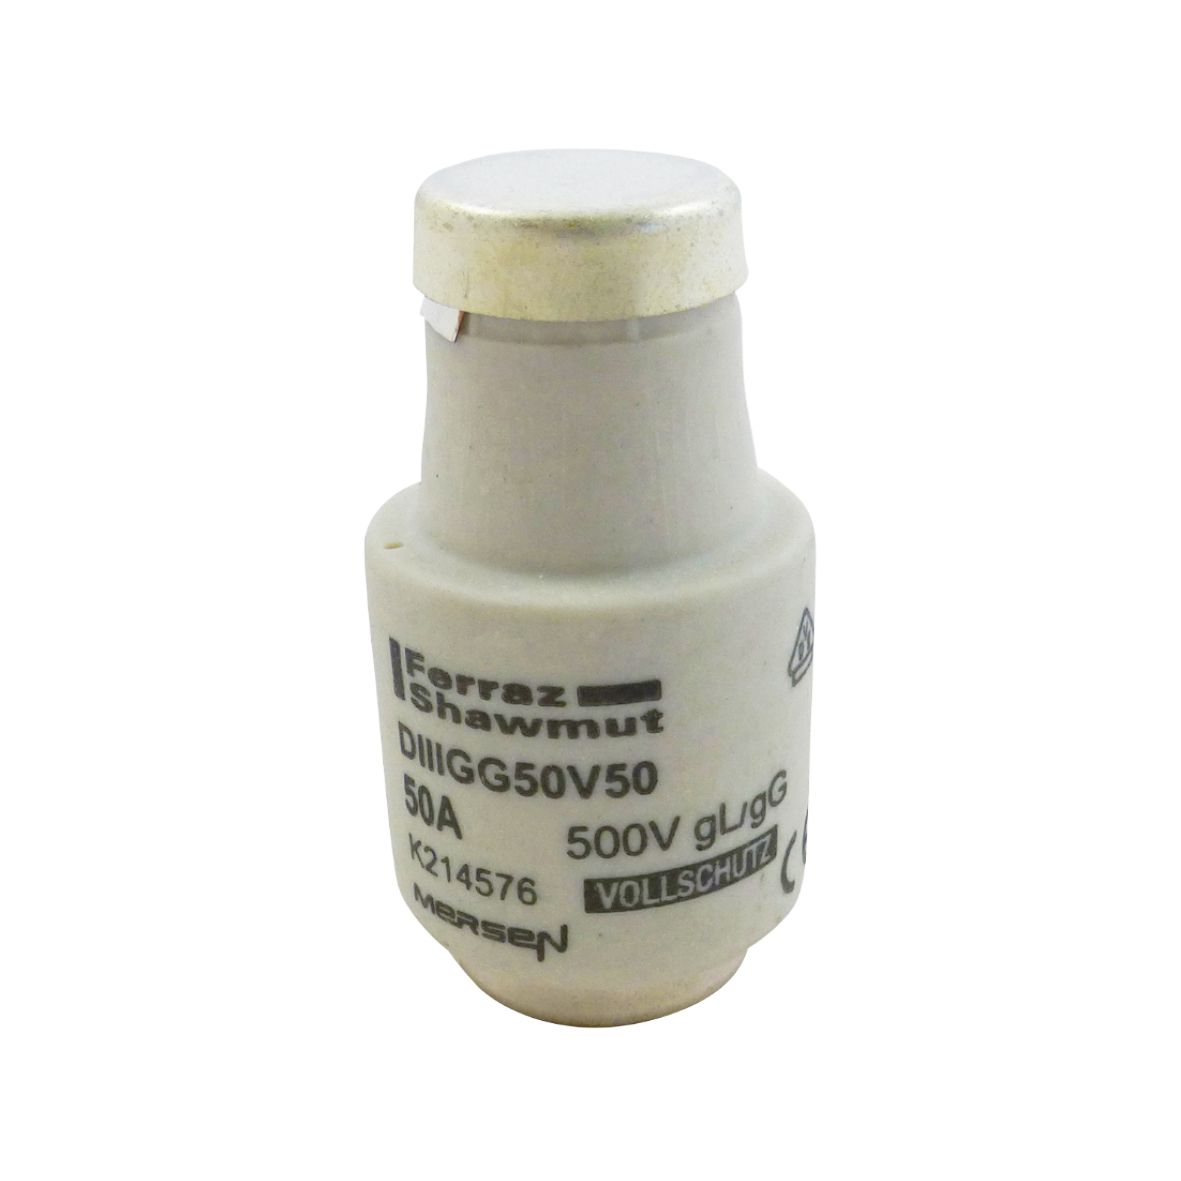 K214576 - D fuse-link, gG, DIII, 500VAC, 50A, white